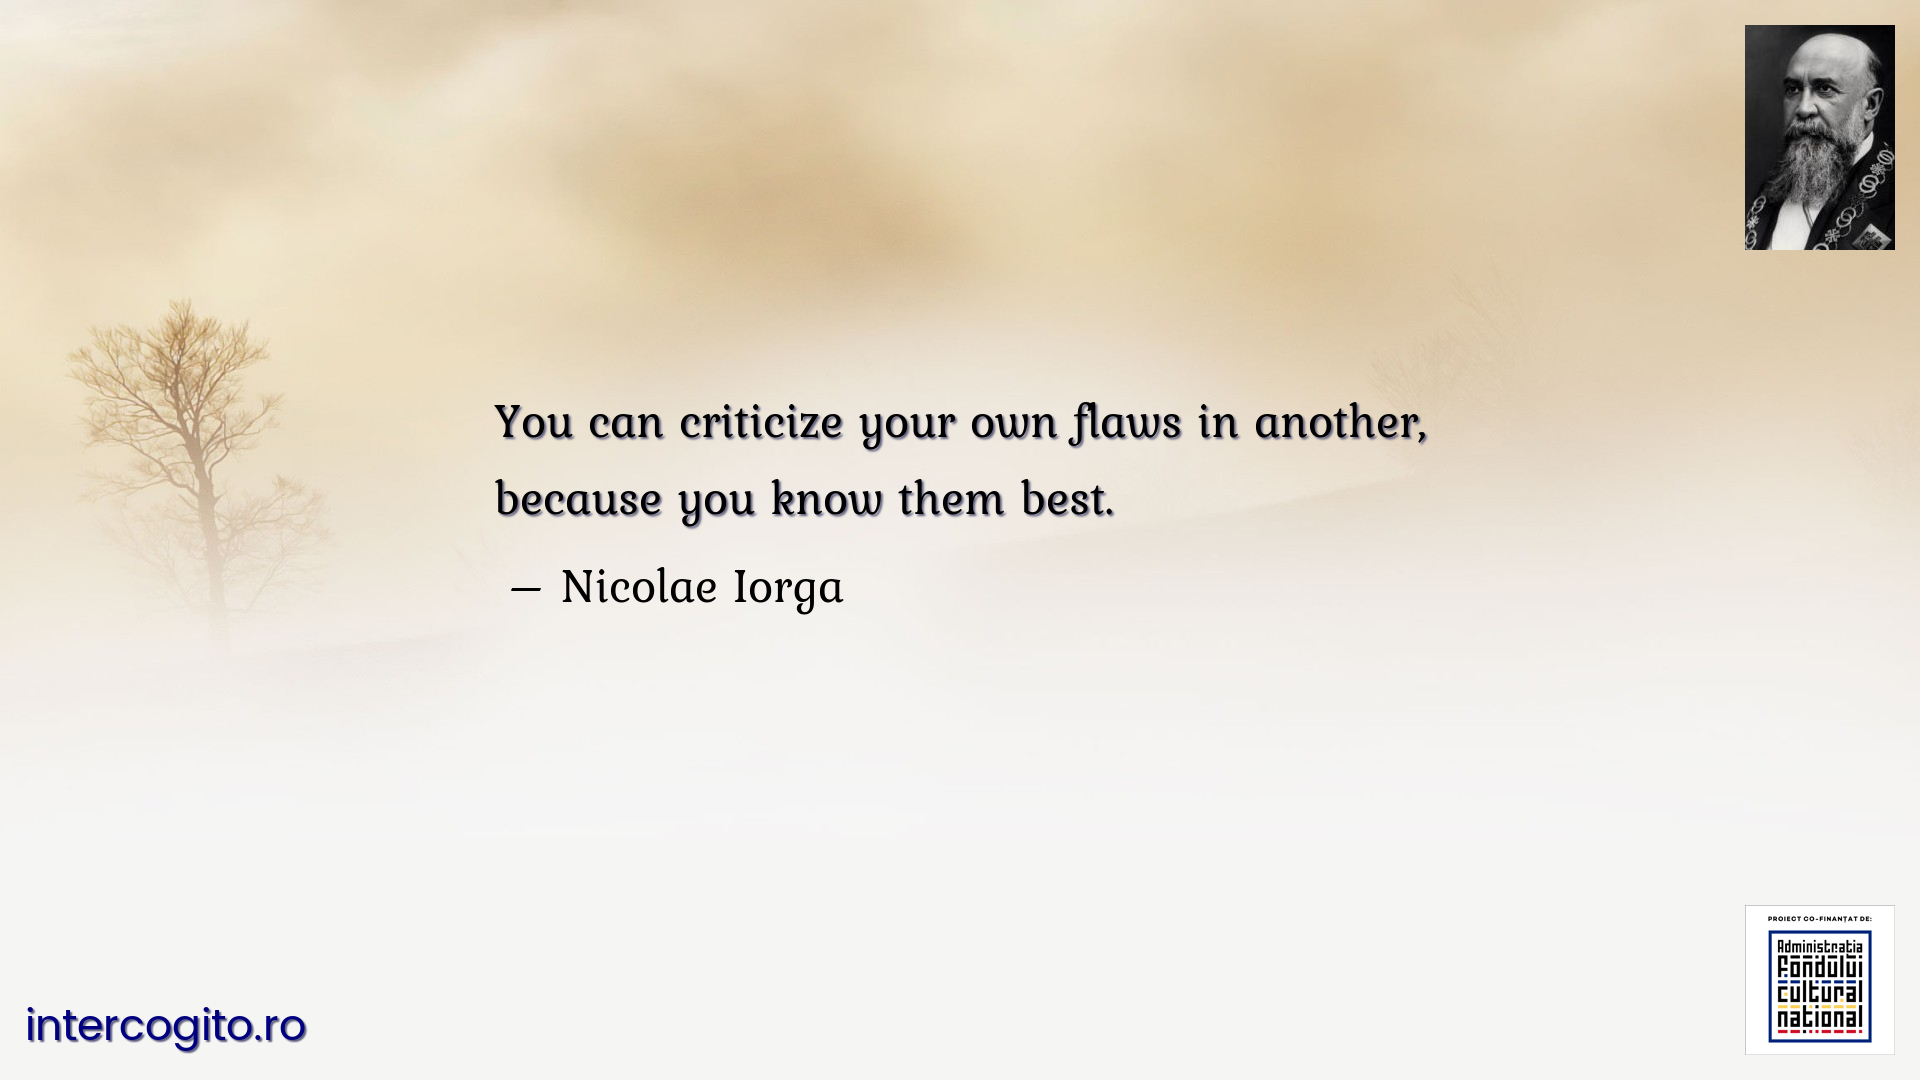 You can criticize your own flaws in another, because you know them best.